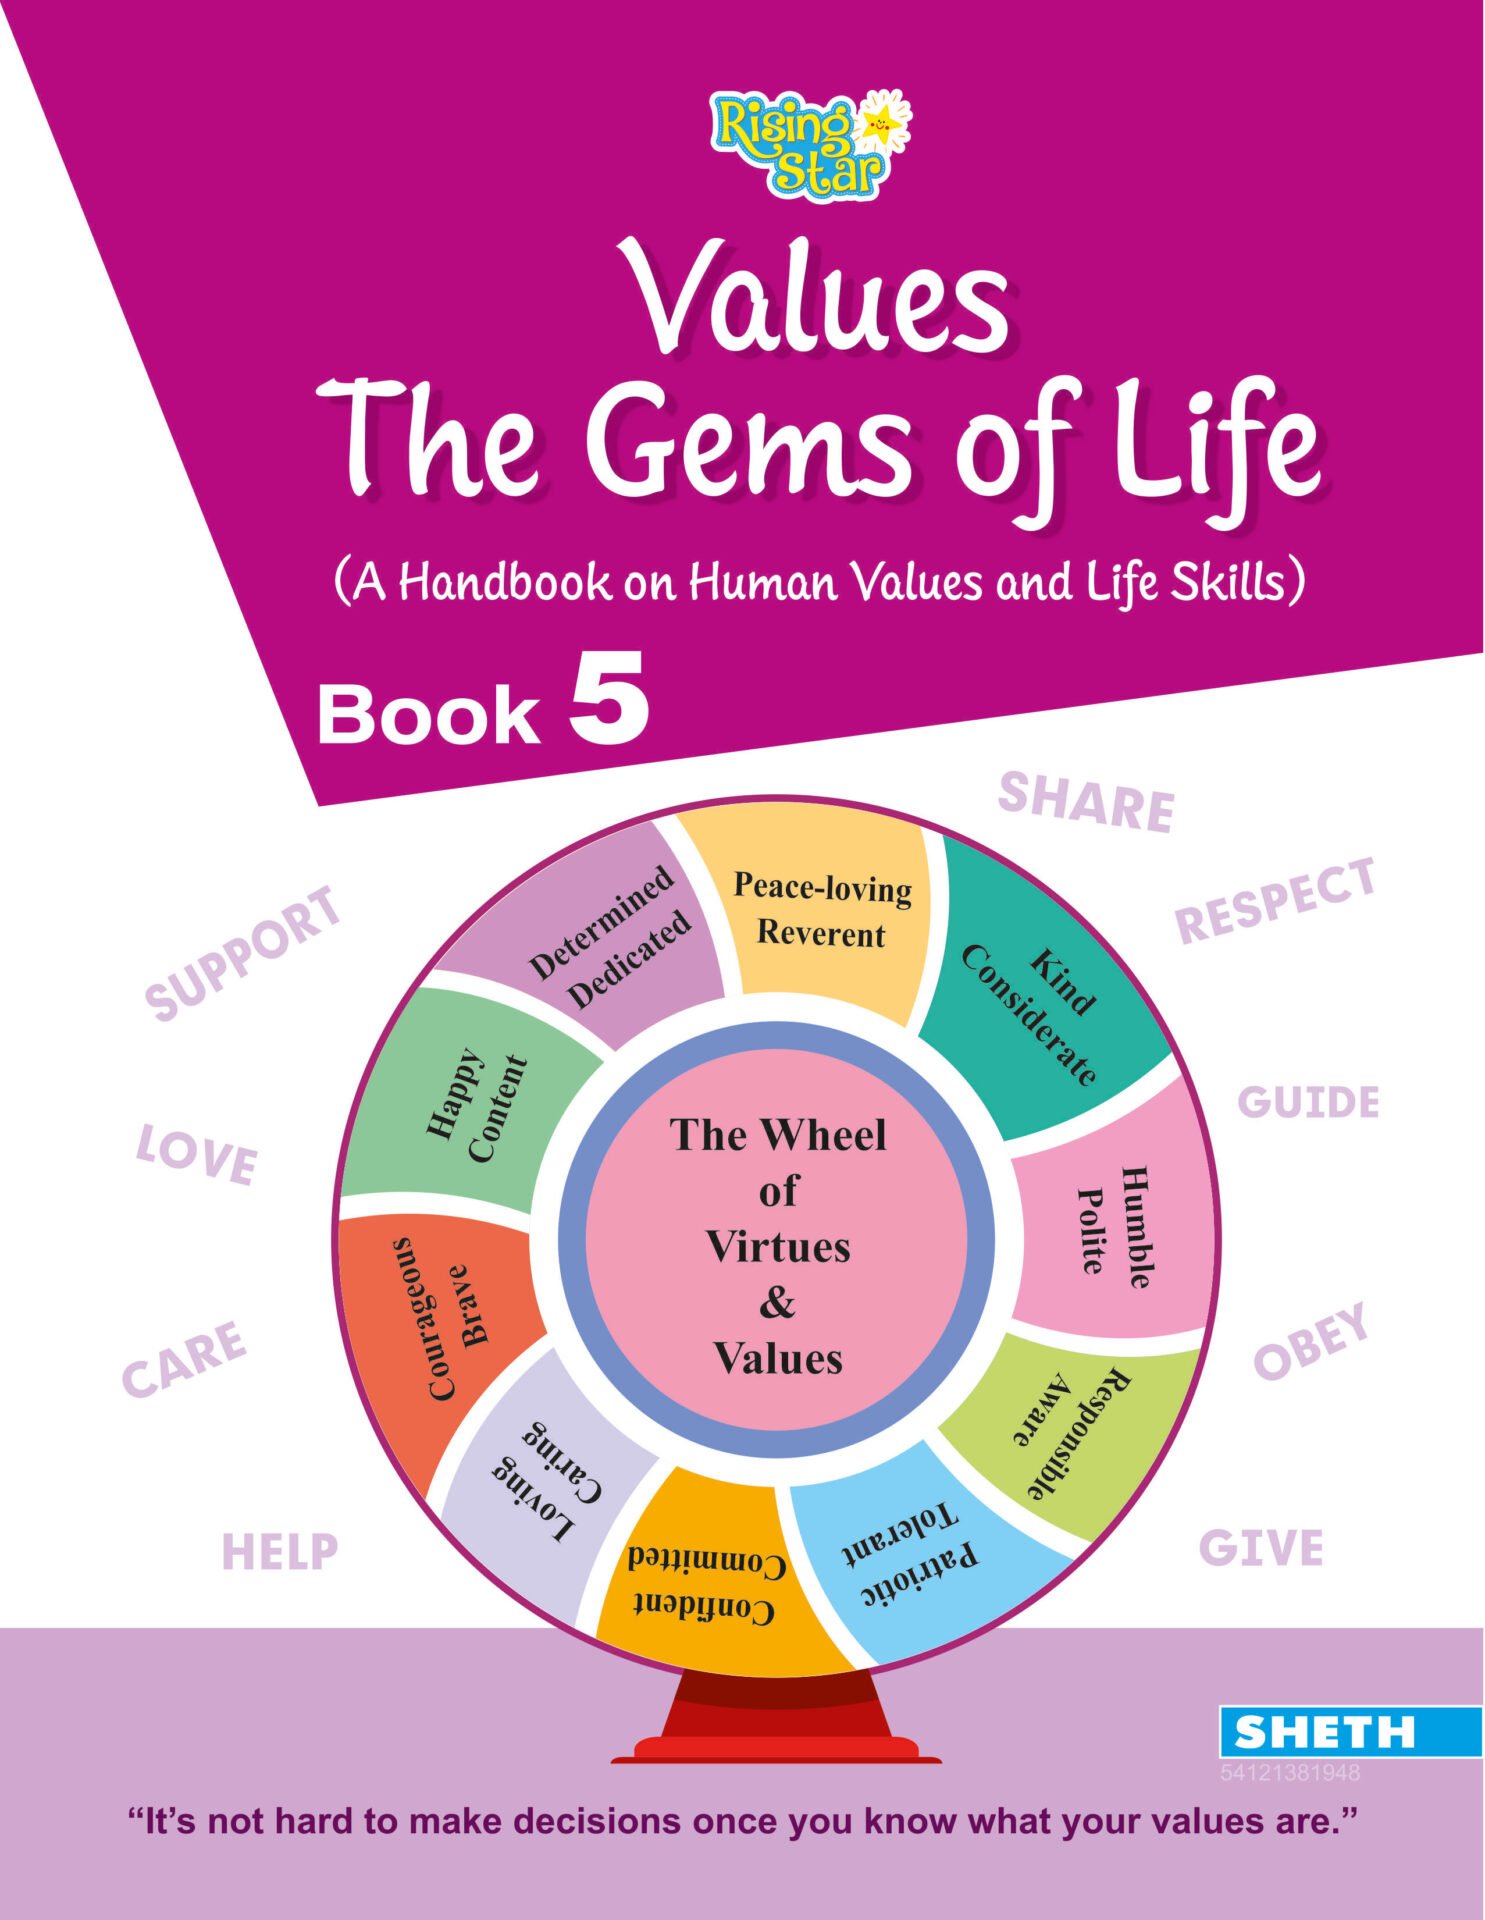 Rising Star Values The Gems of Life Book 5 1 1